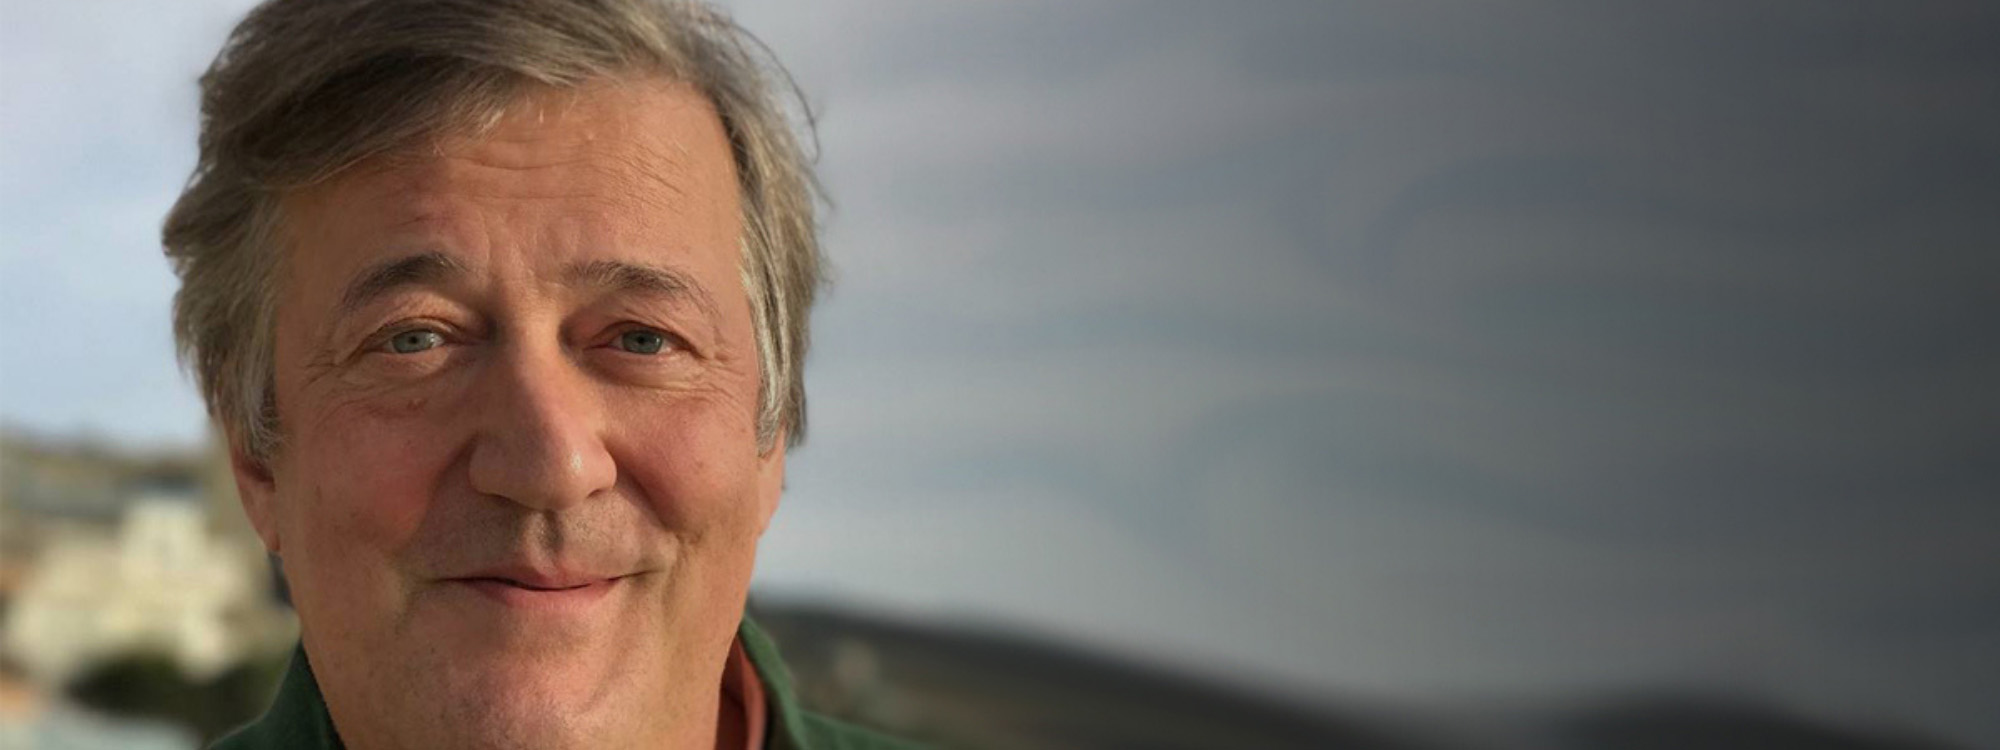 Portrait of author and comedian Stephen Fry